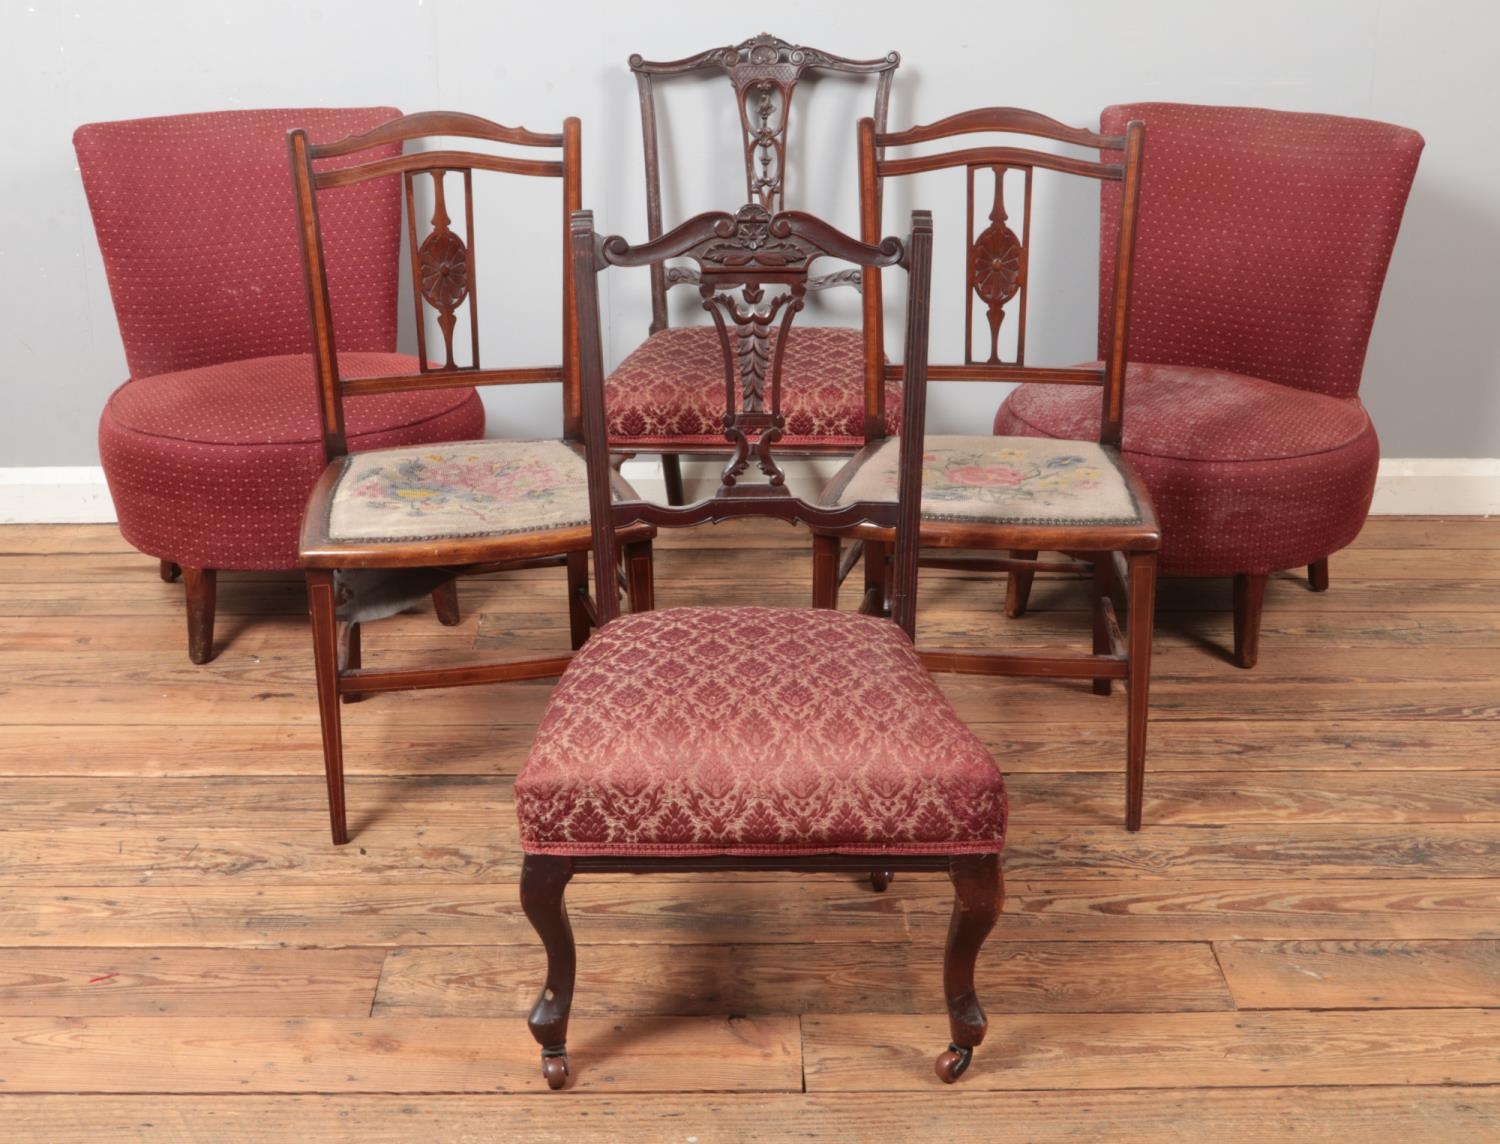 Three pairs of chairs, to include examples raised on casters, with others featuring inlay and carved